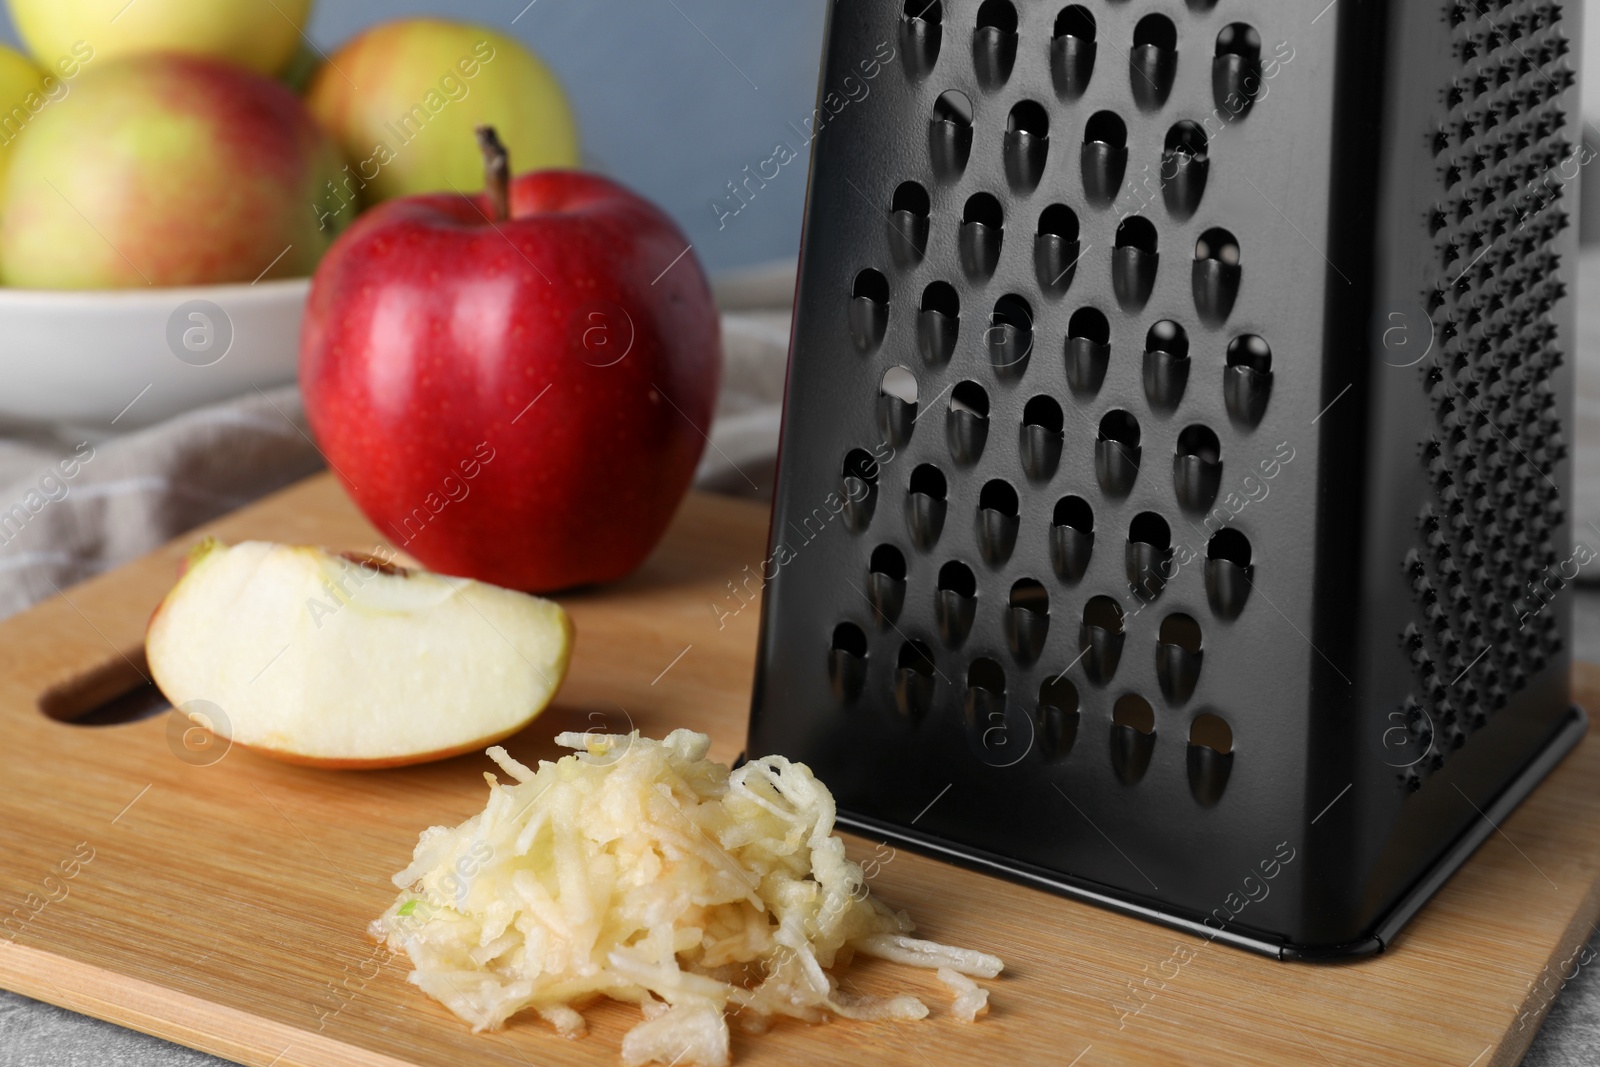 Photo of Grater and fresh ripe apple on wooden board, closeup